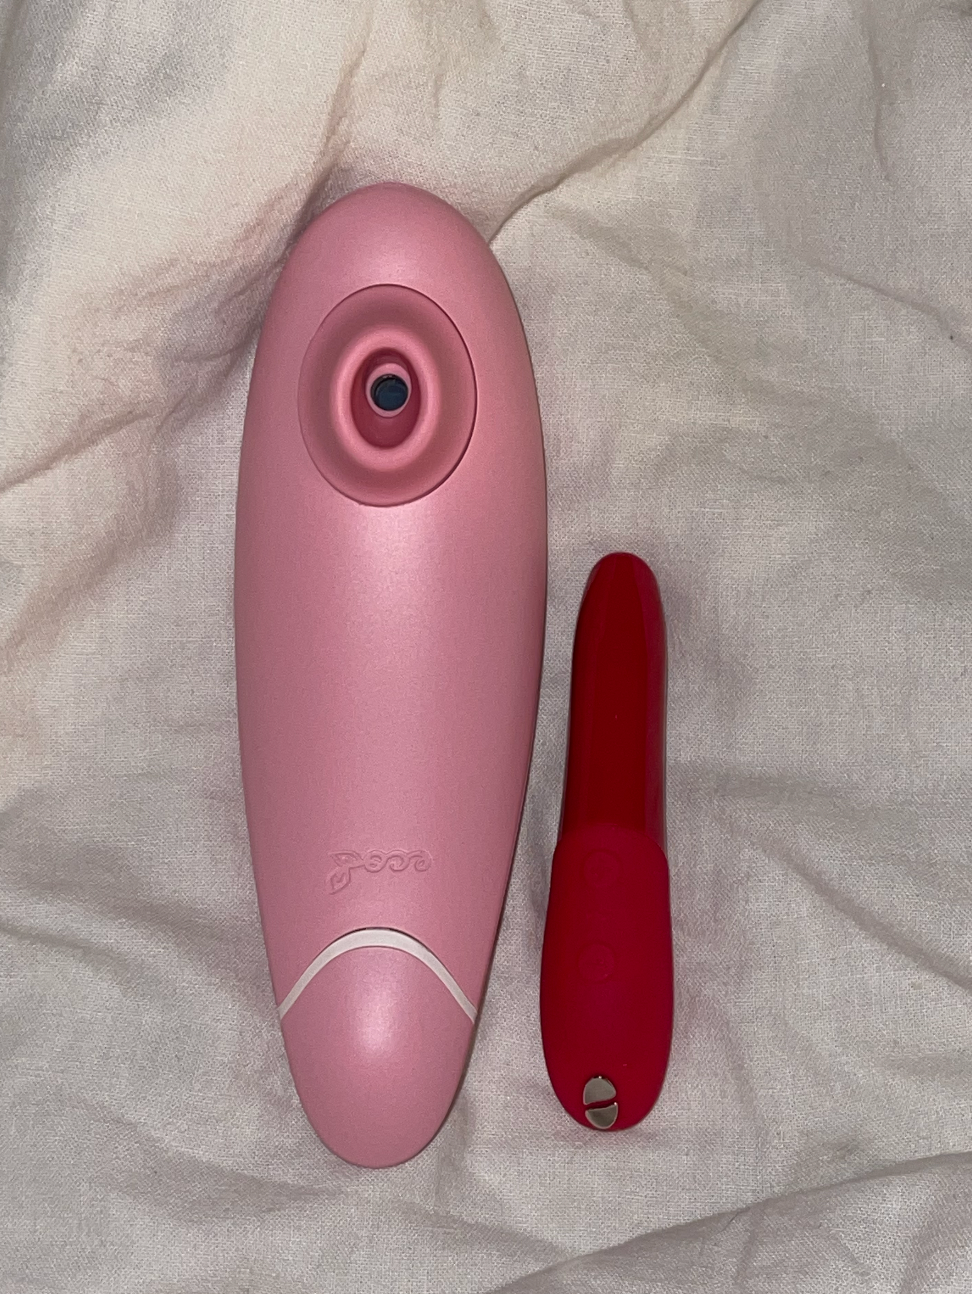 Best vibrator for living at home in your 20s by Sophie Kapner Medium